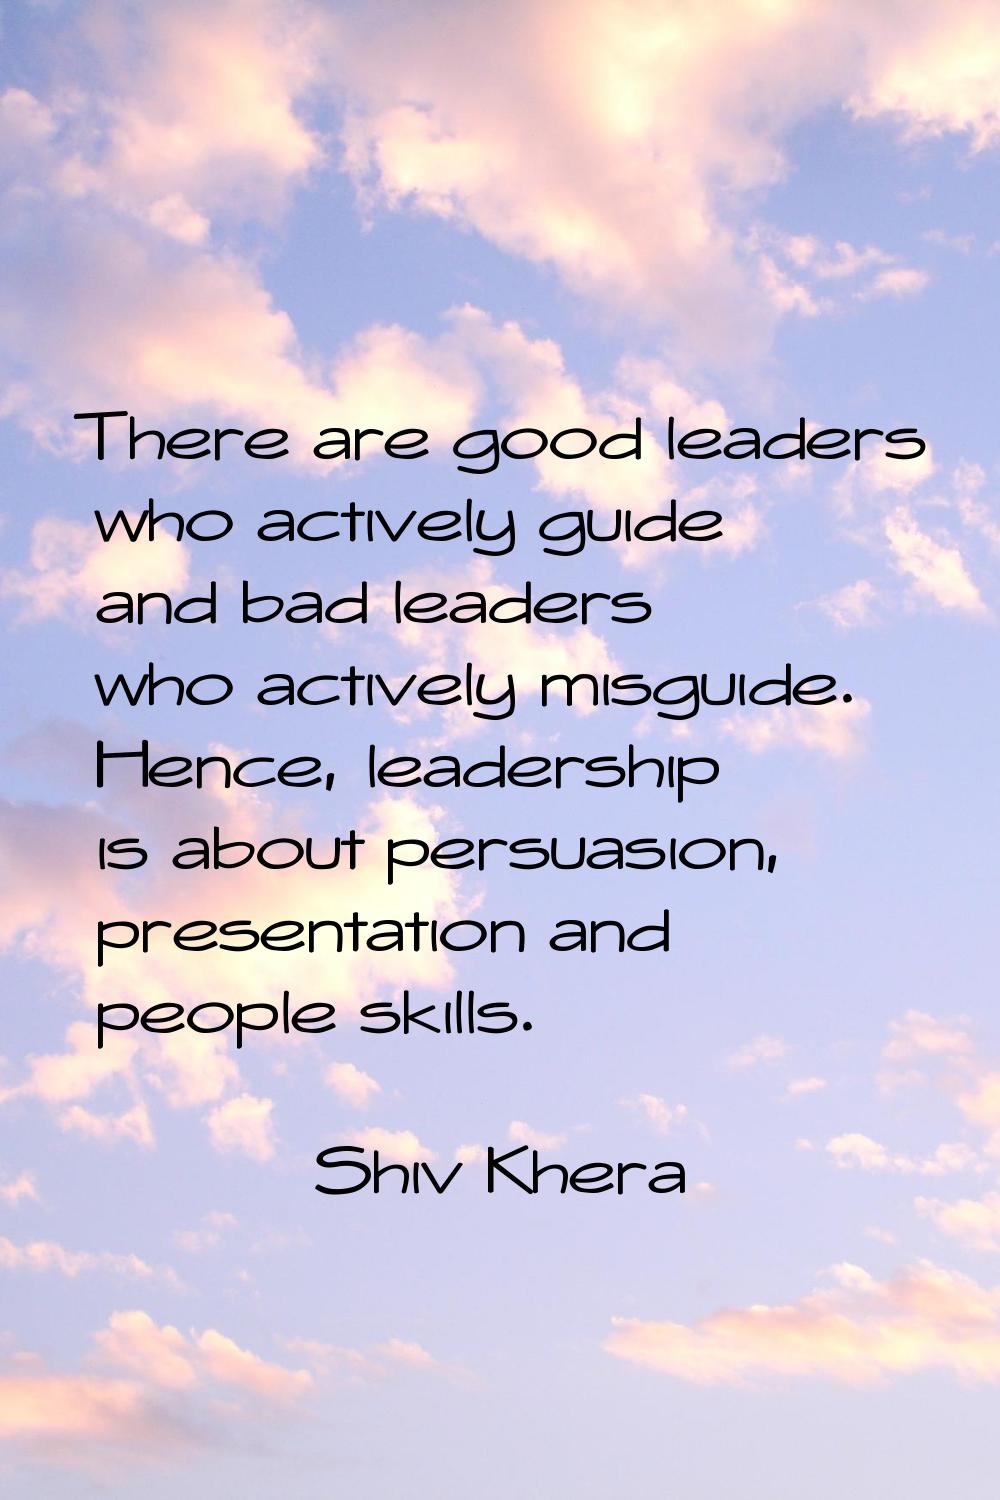 There are good leaders who actively guide and bad leaders who actively misguide. Hence, leadership 